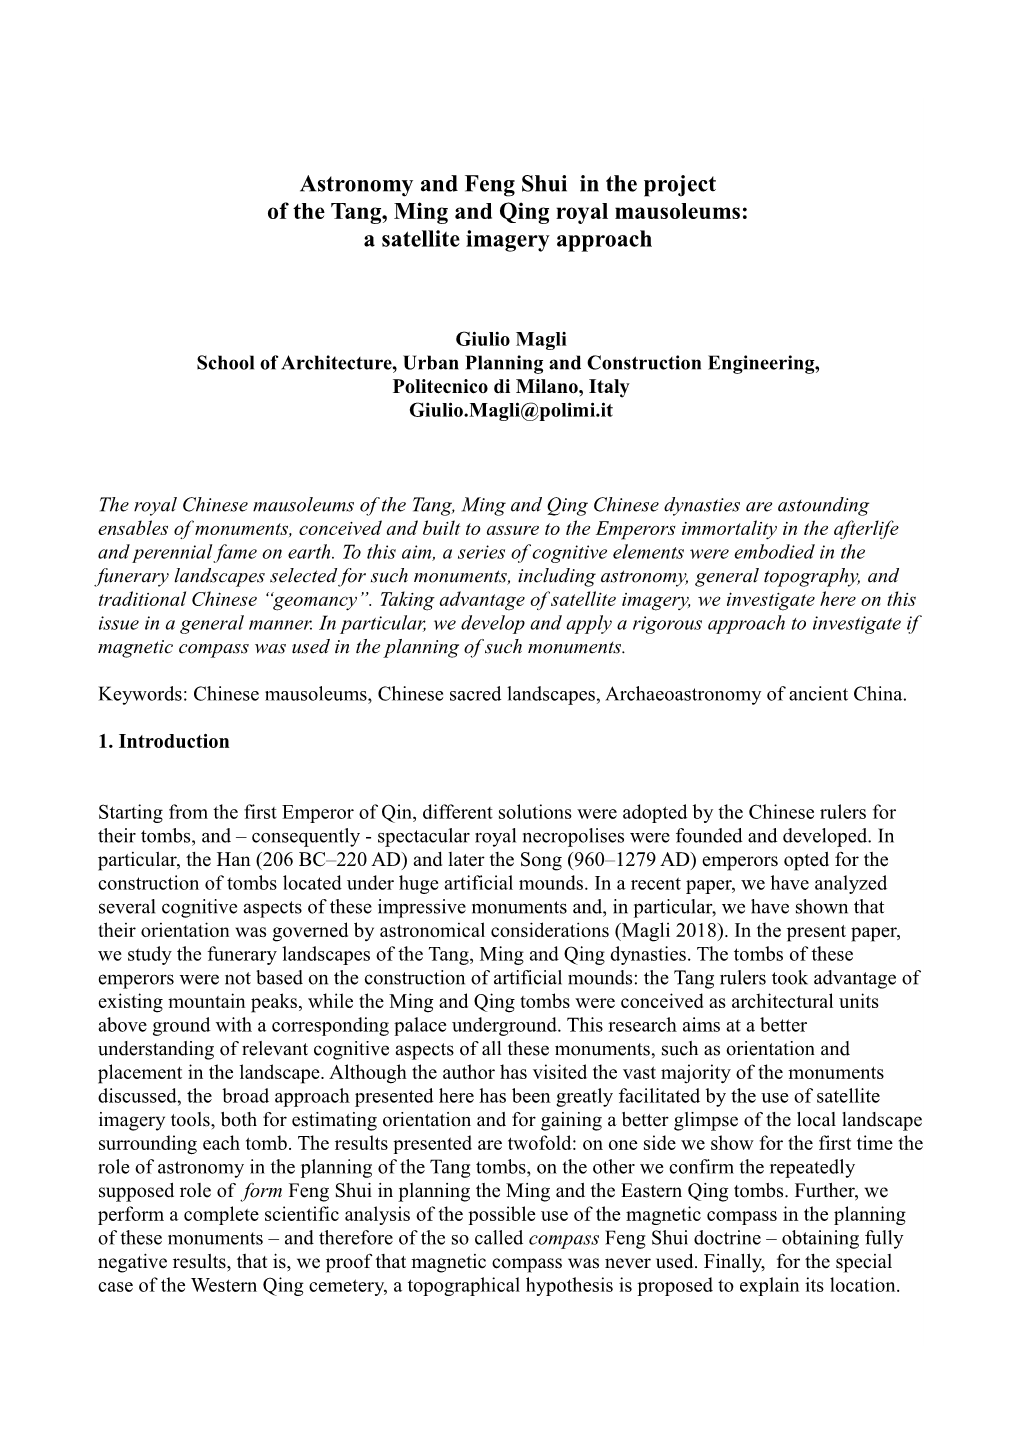 Astronomy and Feng Shui in the Project of the Tang, Ming and Qing Royal Mausoleums: a Satellite Imagery Approach